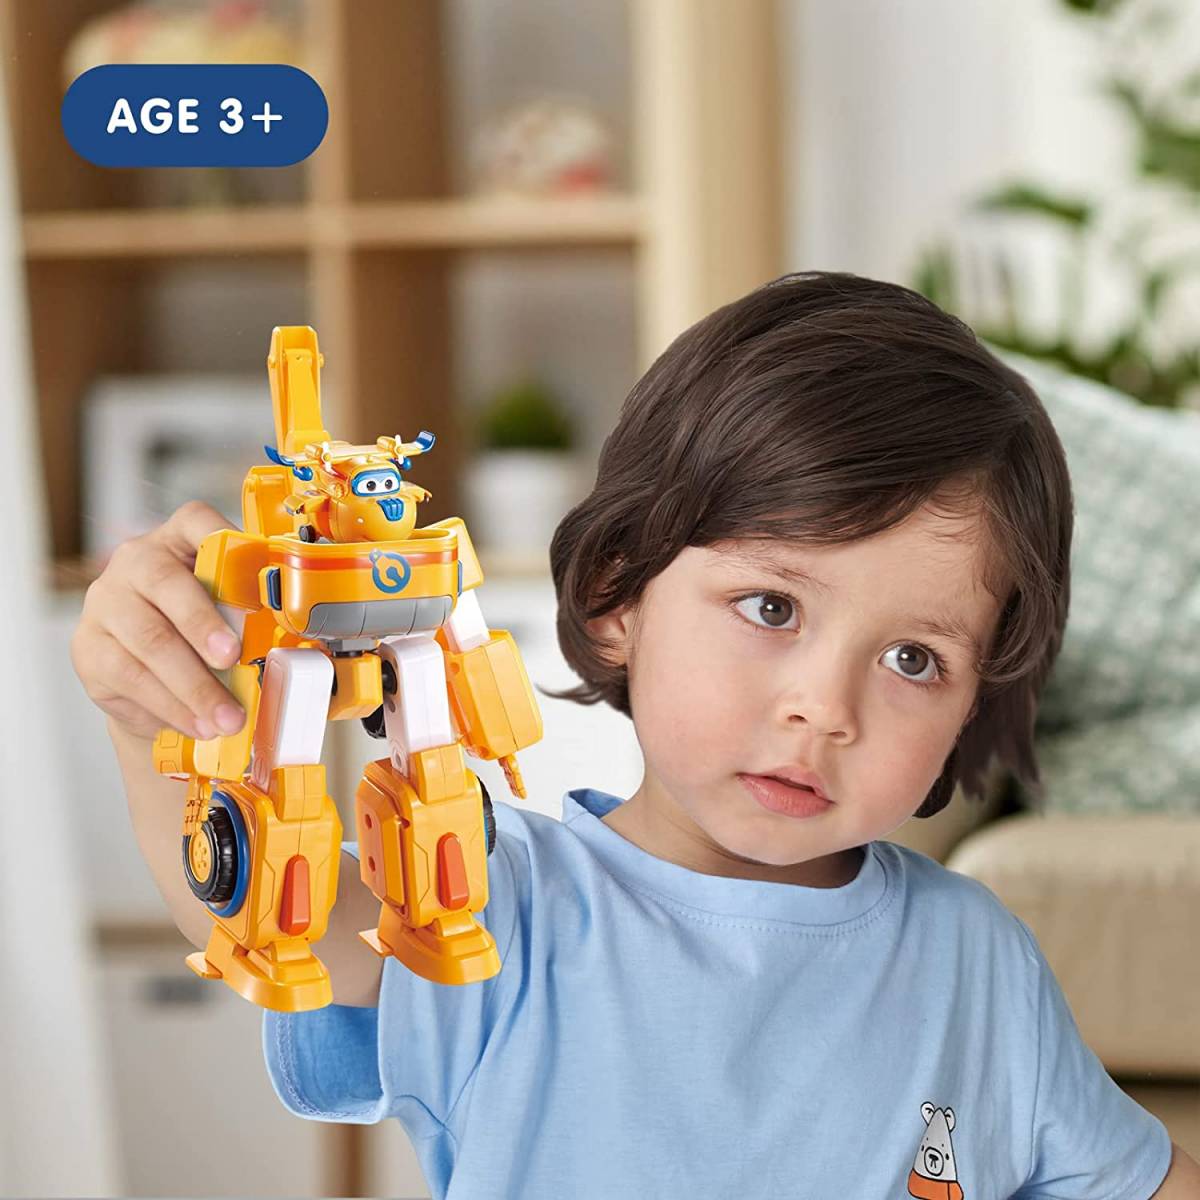 Mini véhicules transformables super wings : donnie - jouets Auldey